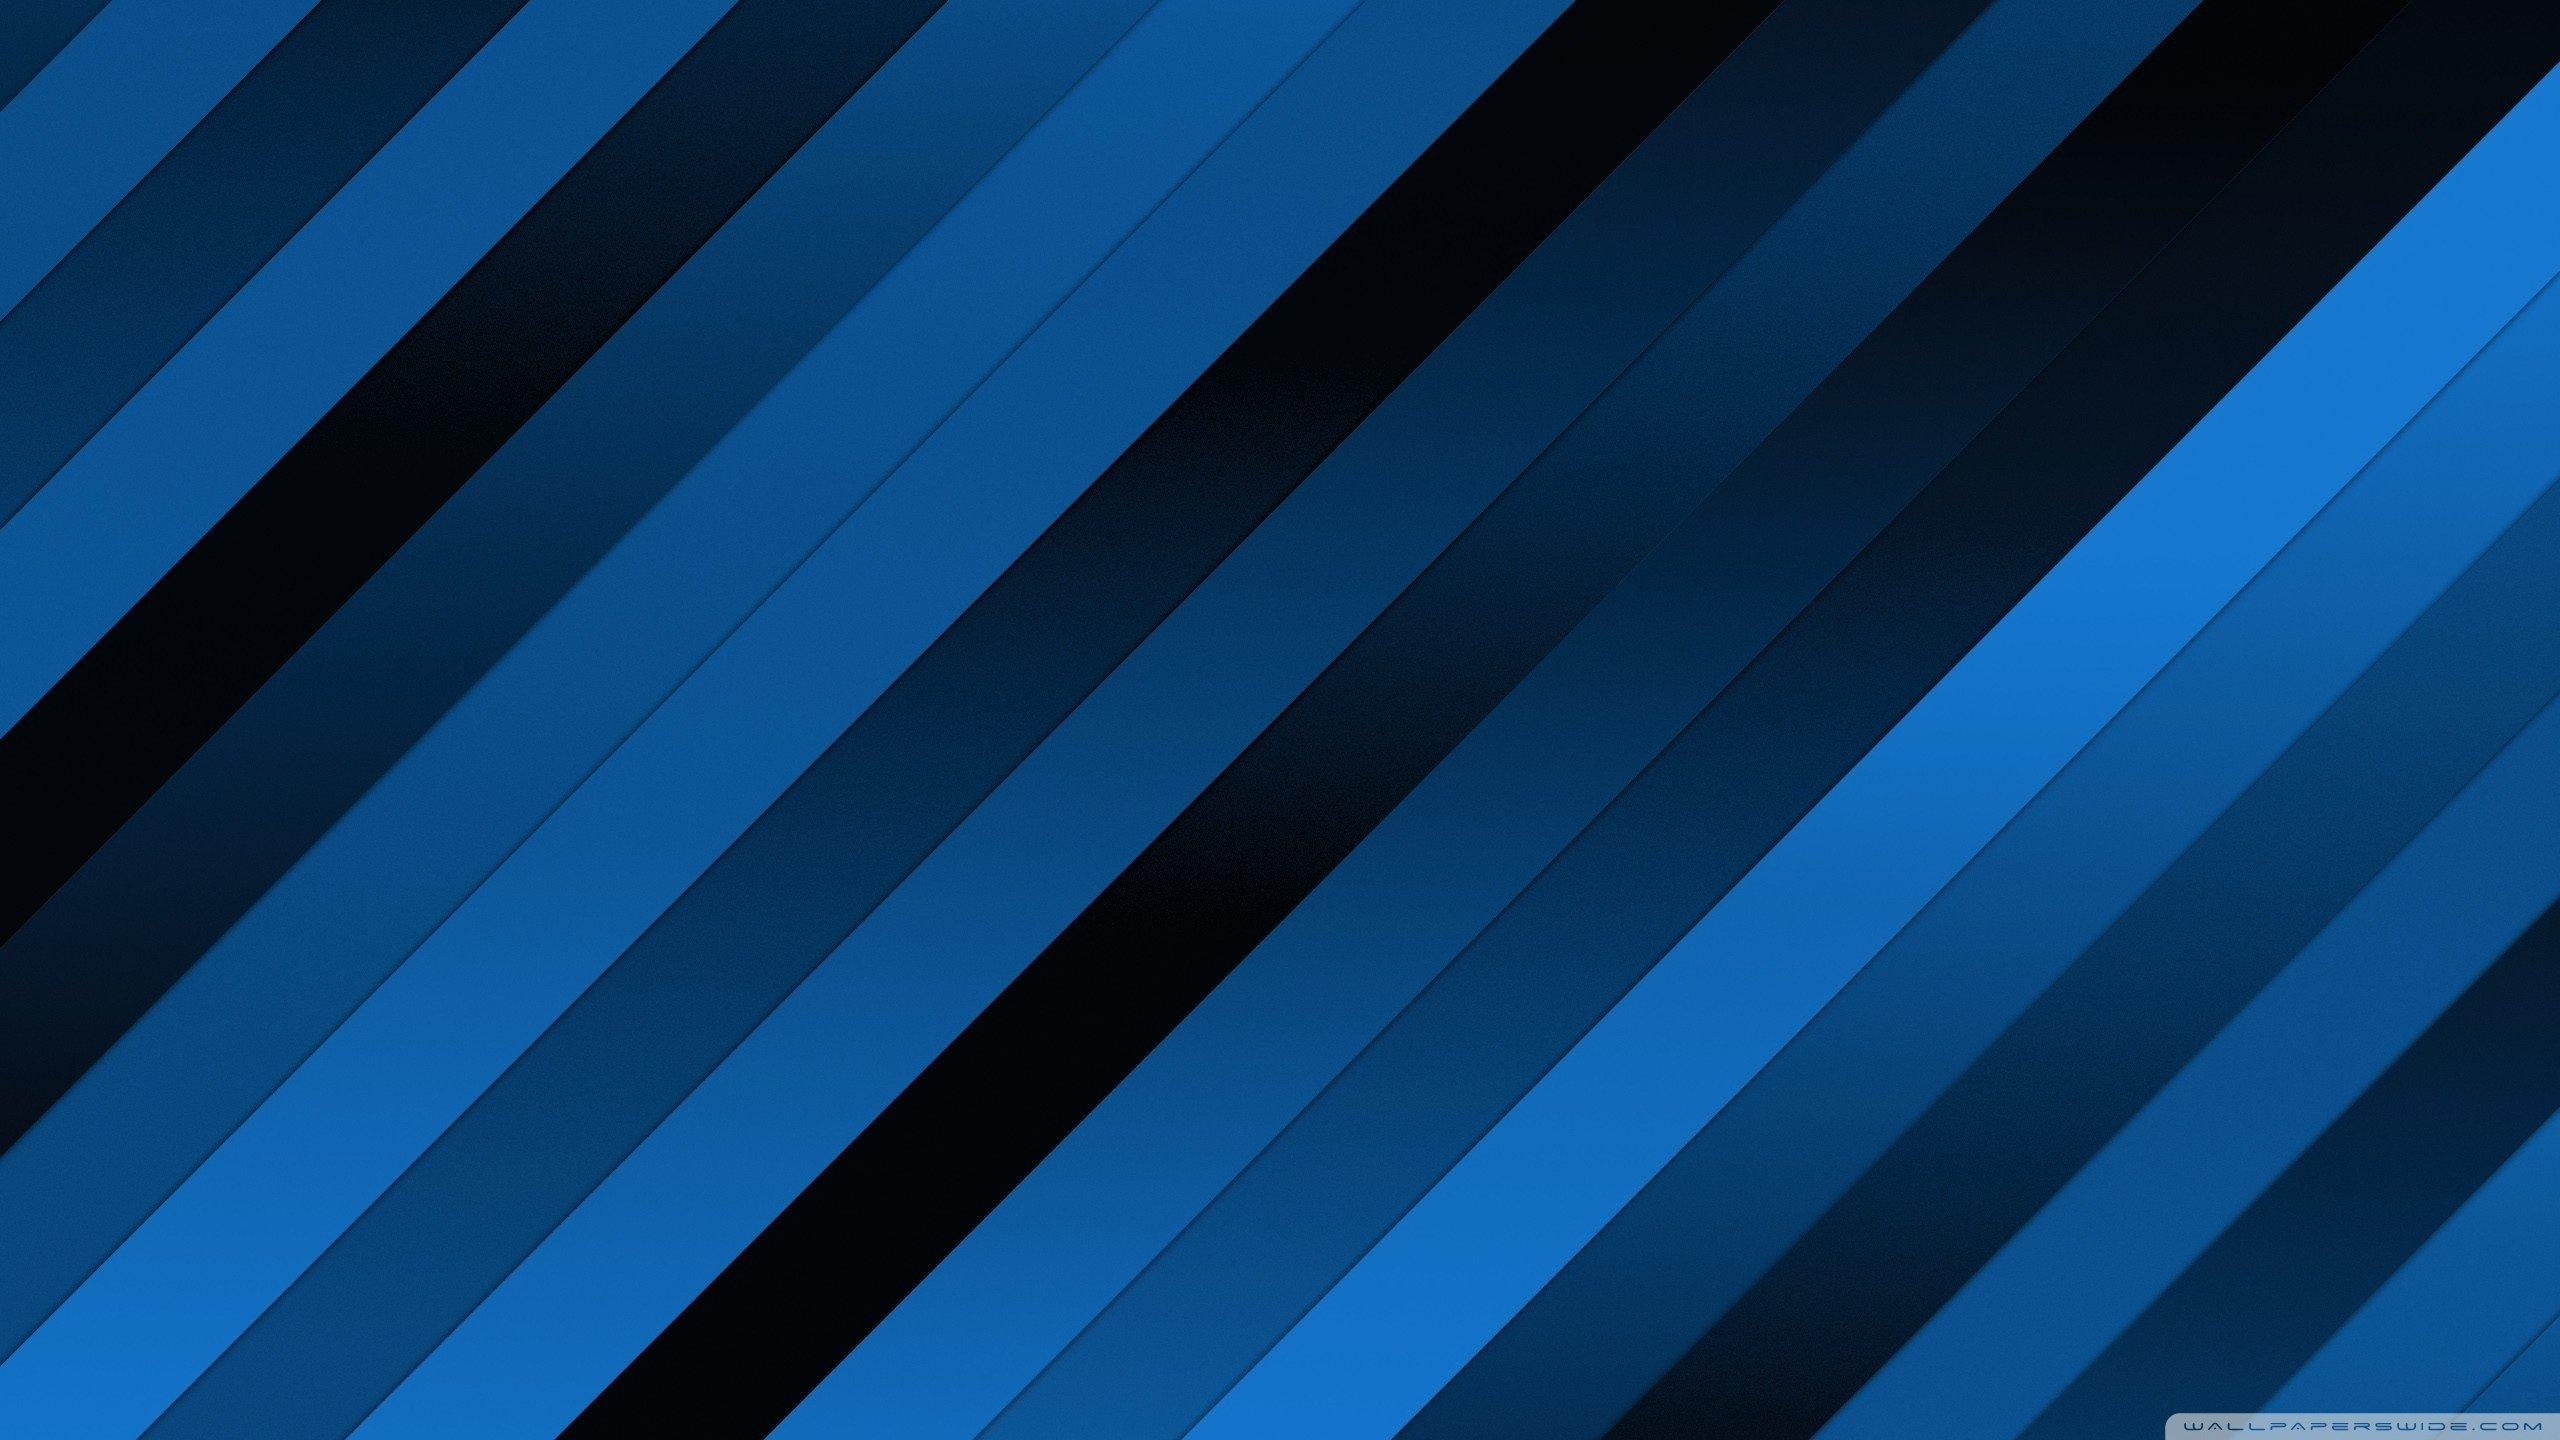 Wonderful High Quality Wallpaper's Collection: Striped